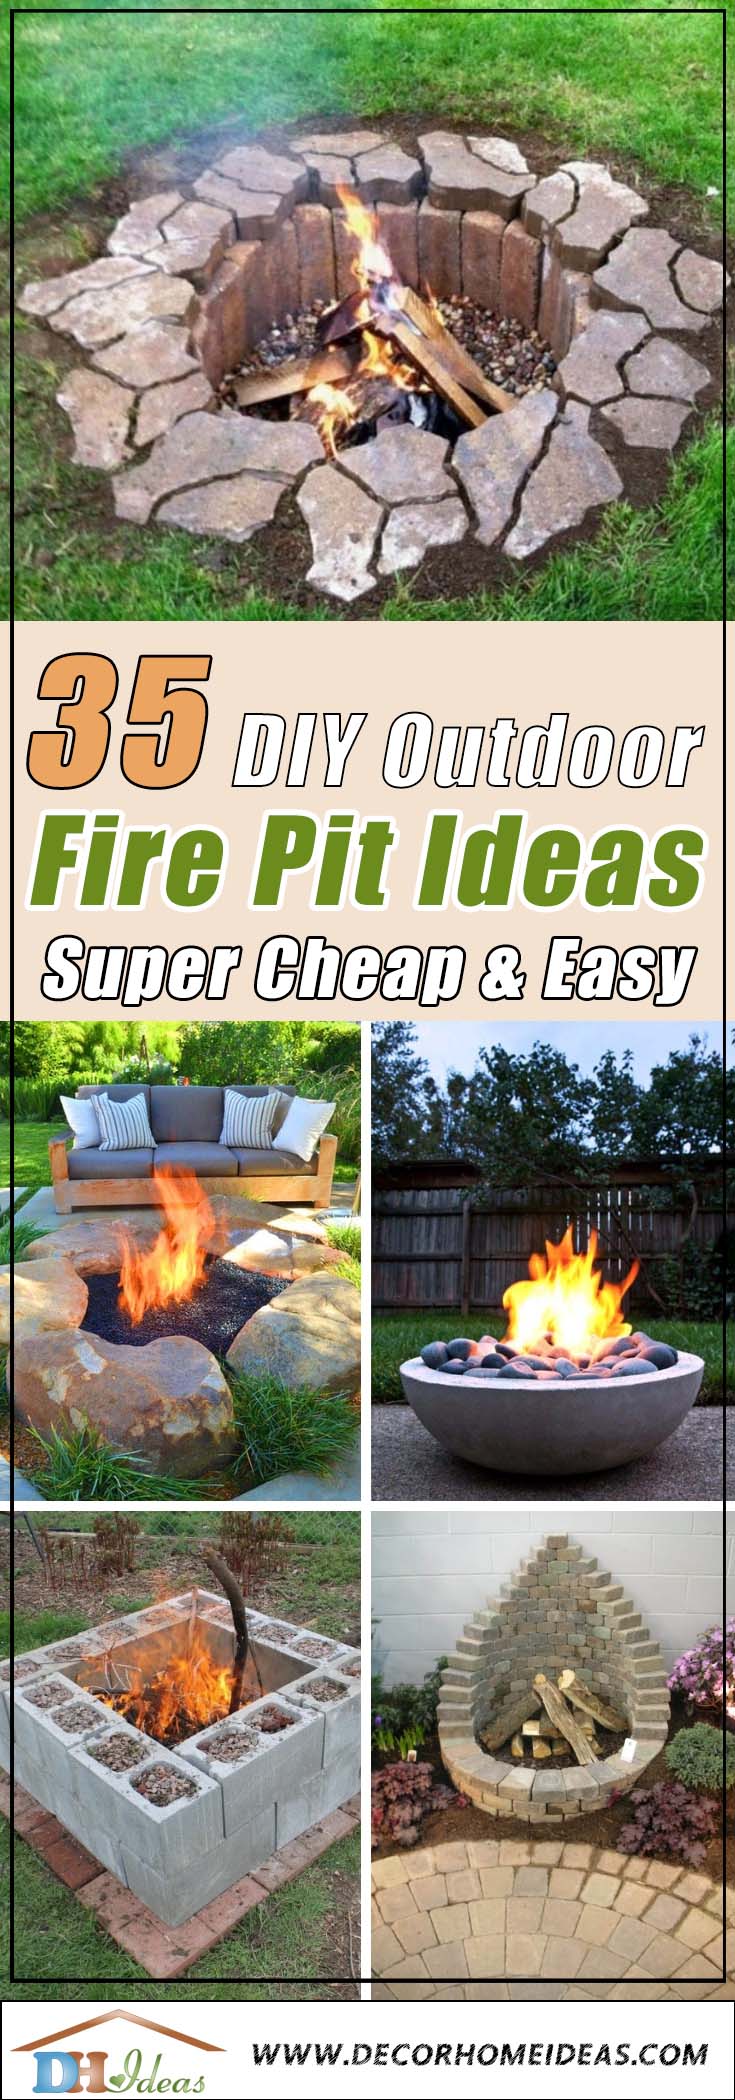 35 Easy To Do Fire Pit Ideas And, Inexpensive Fire Pit Ideas